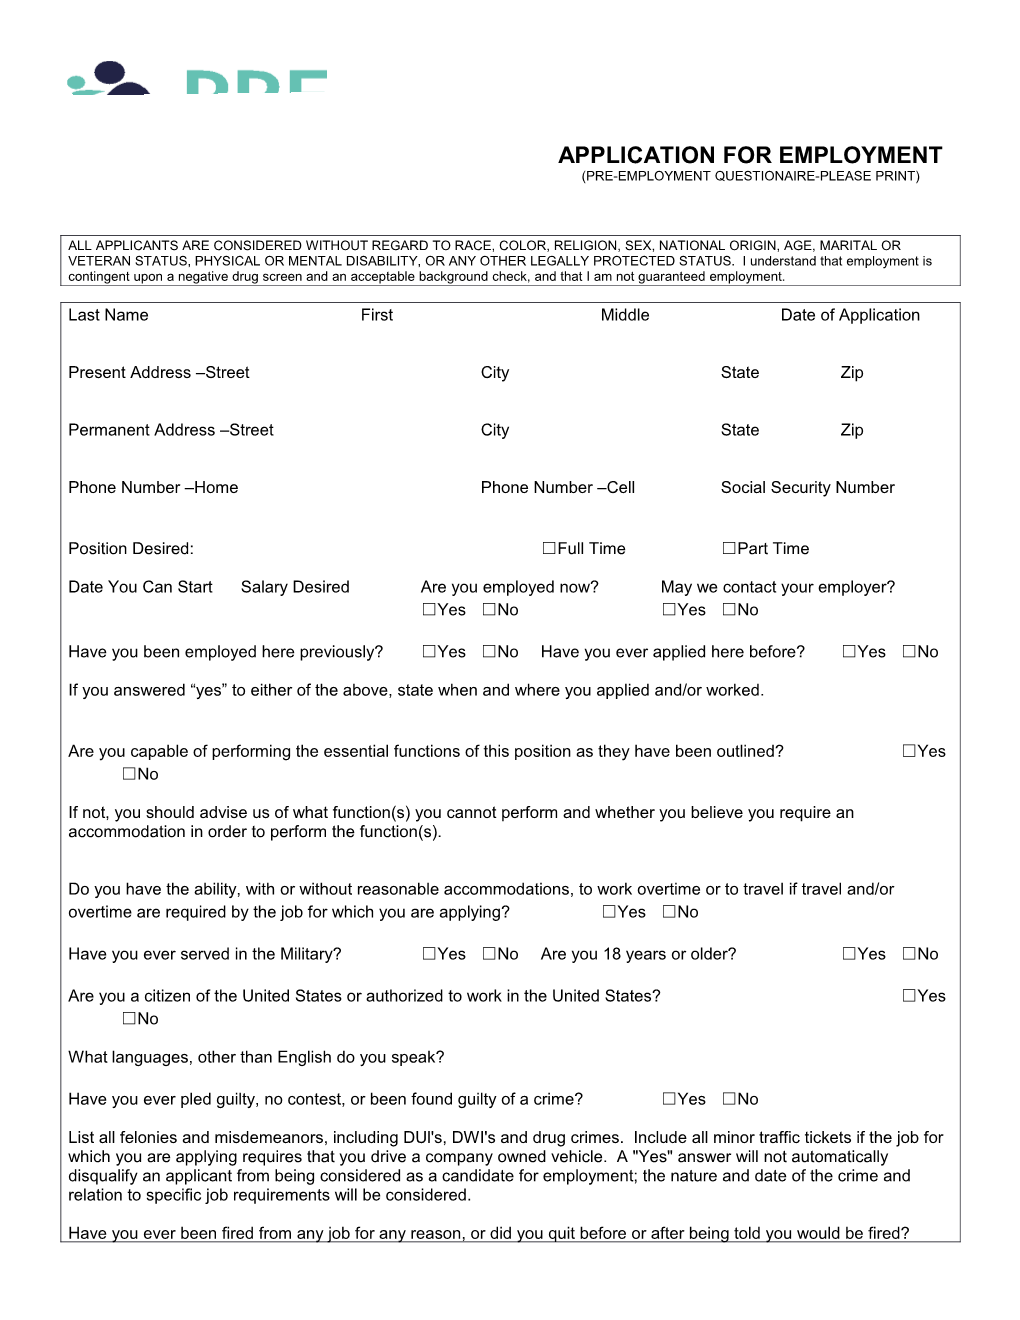 Application for Employment s157